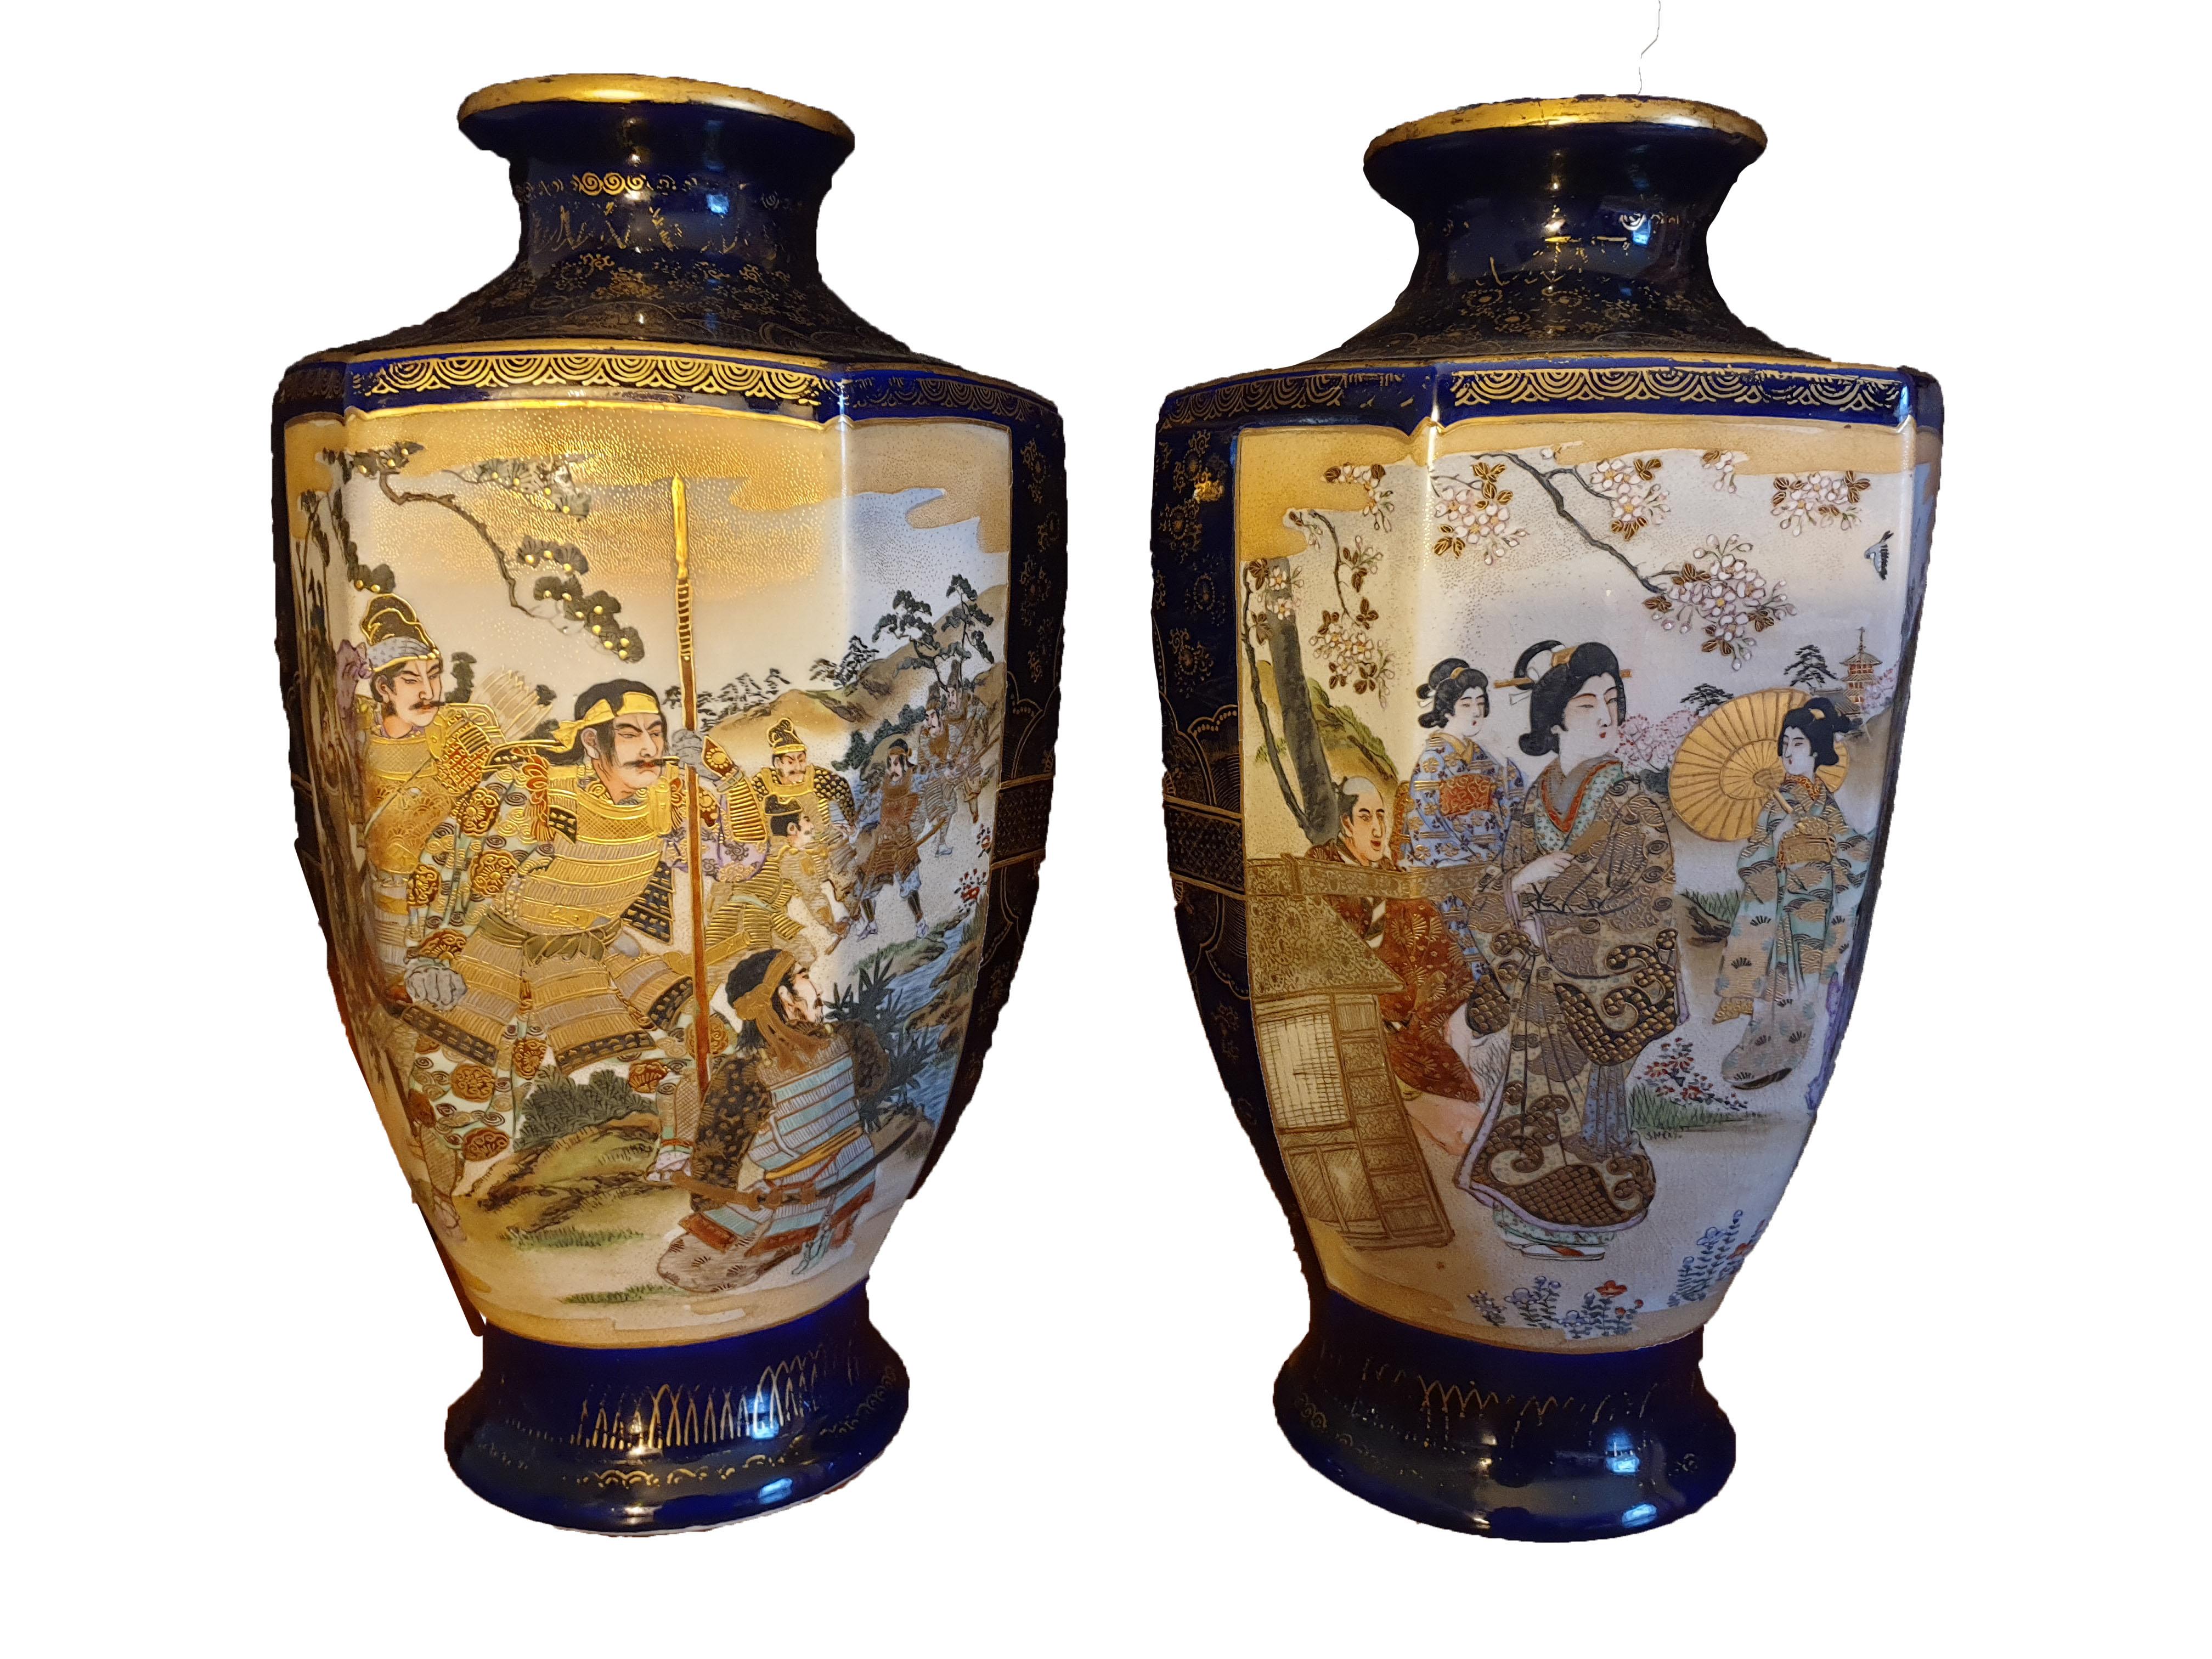 A massive pair of Japanese Meji Period vases thats from 1880, each panelled in an hexagonal shape depicites a different scene. Fine gilding and hand enameling on 24-karat gold imitating lotus flowers, with Imperial scenes and spirit blossoms on a